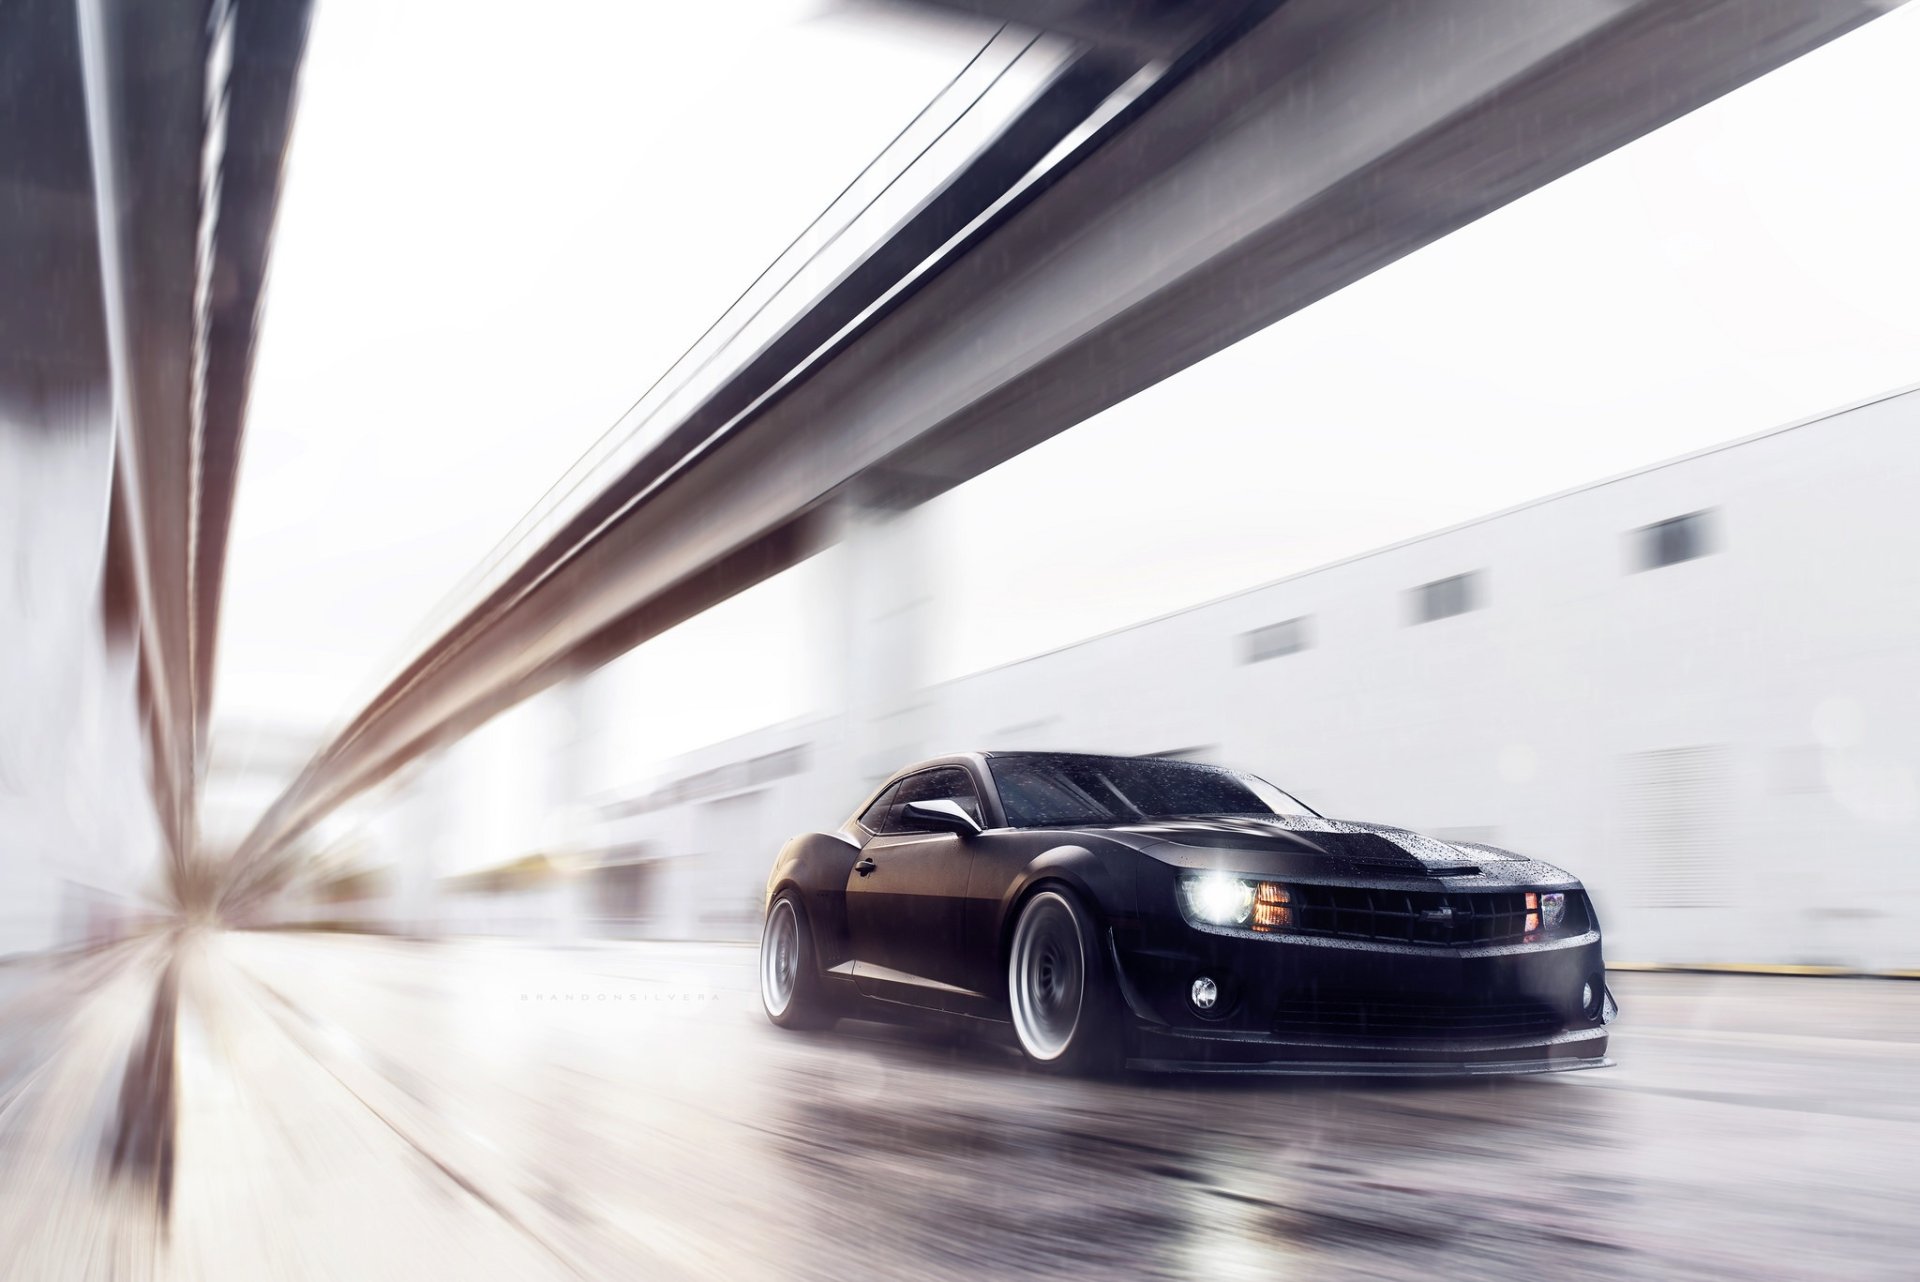 Chevrolet Camaro HD Wallpaper | Background Image | 2048x1367 | ID:762317 - Wallpaper Abyss